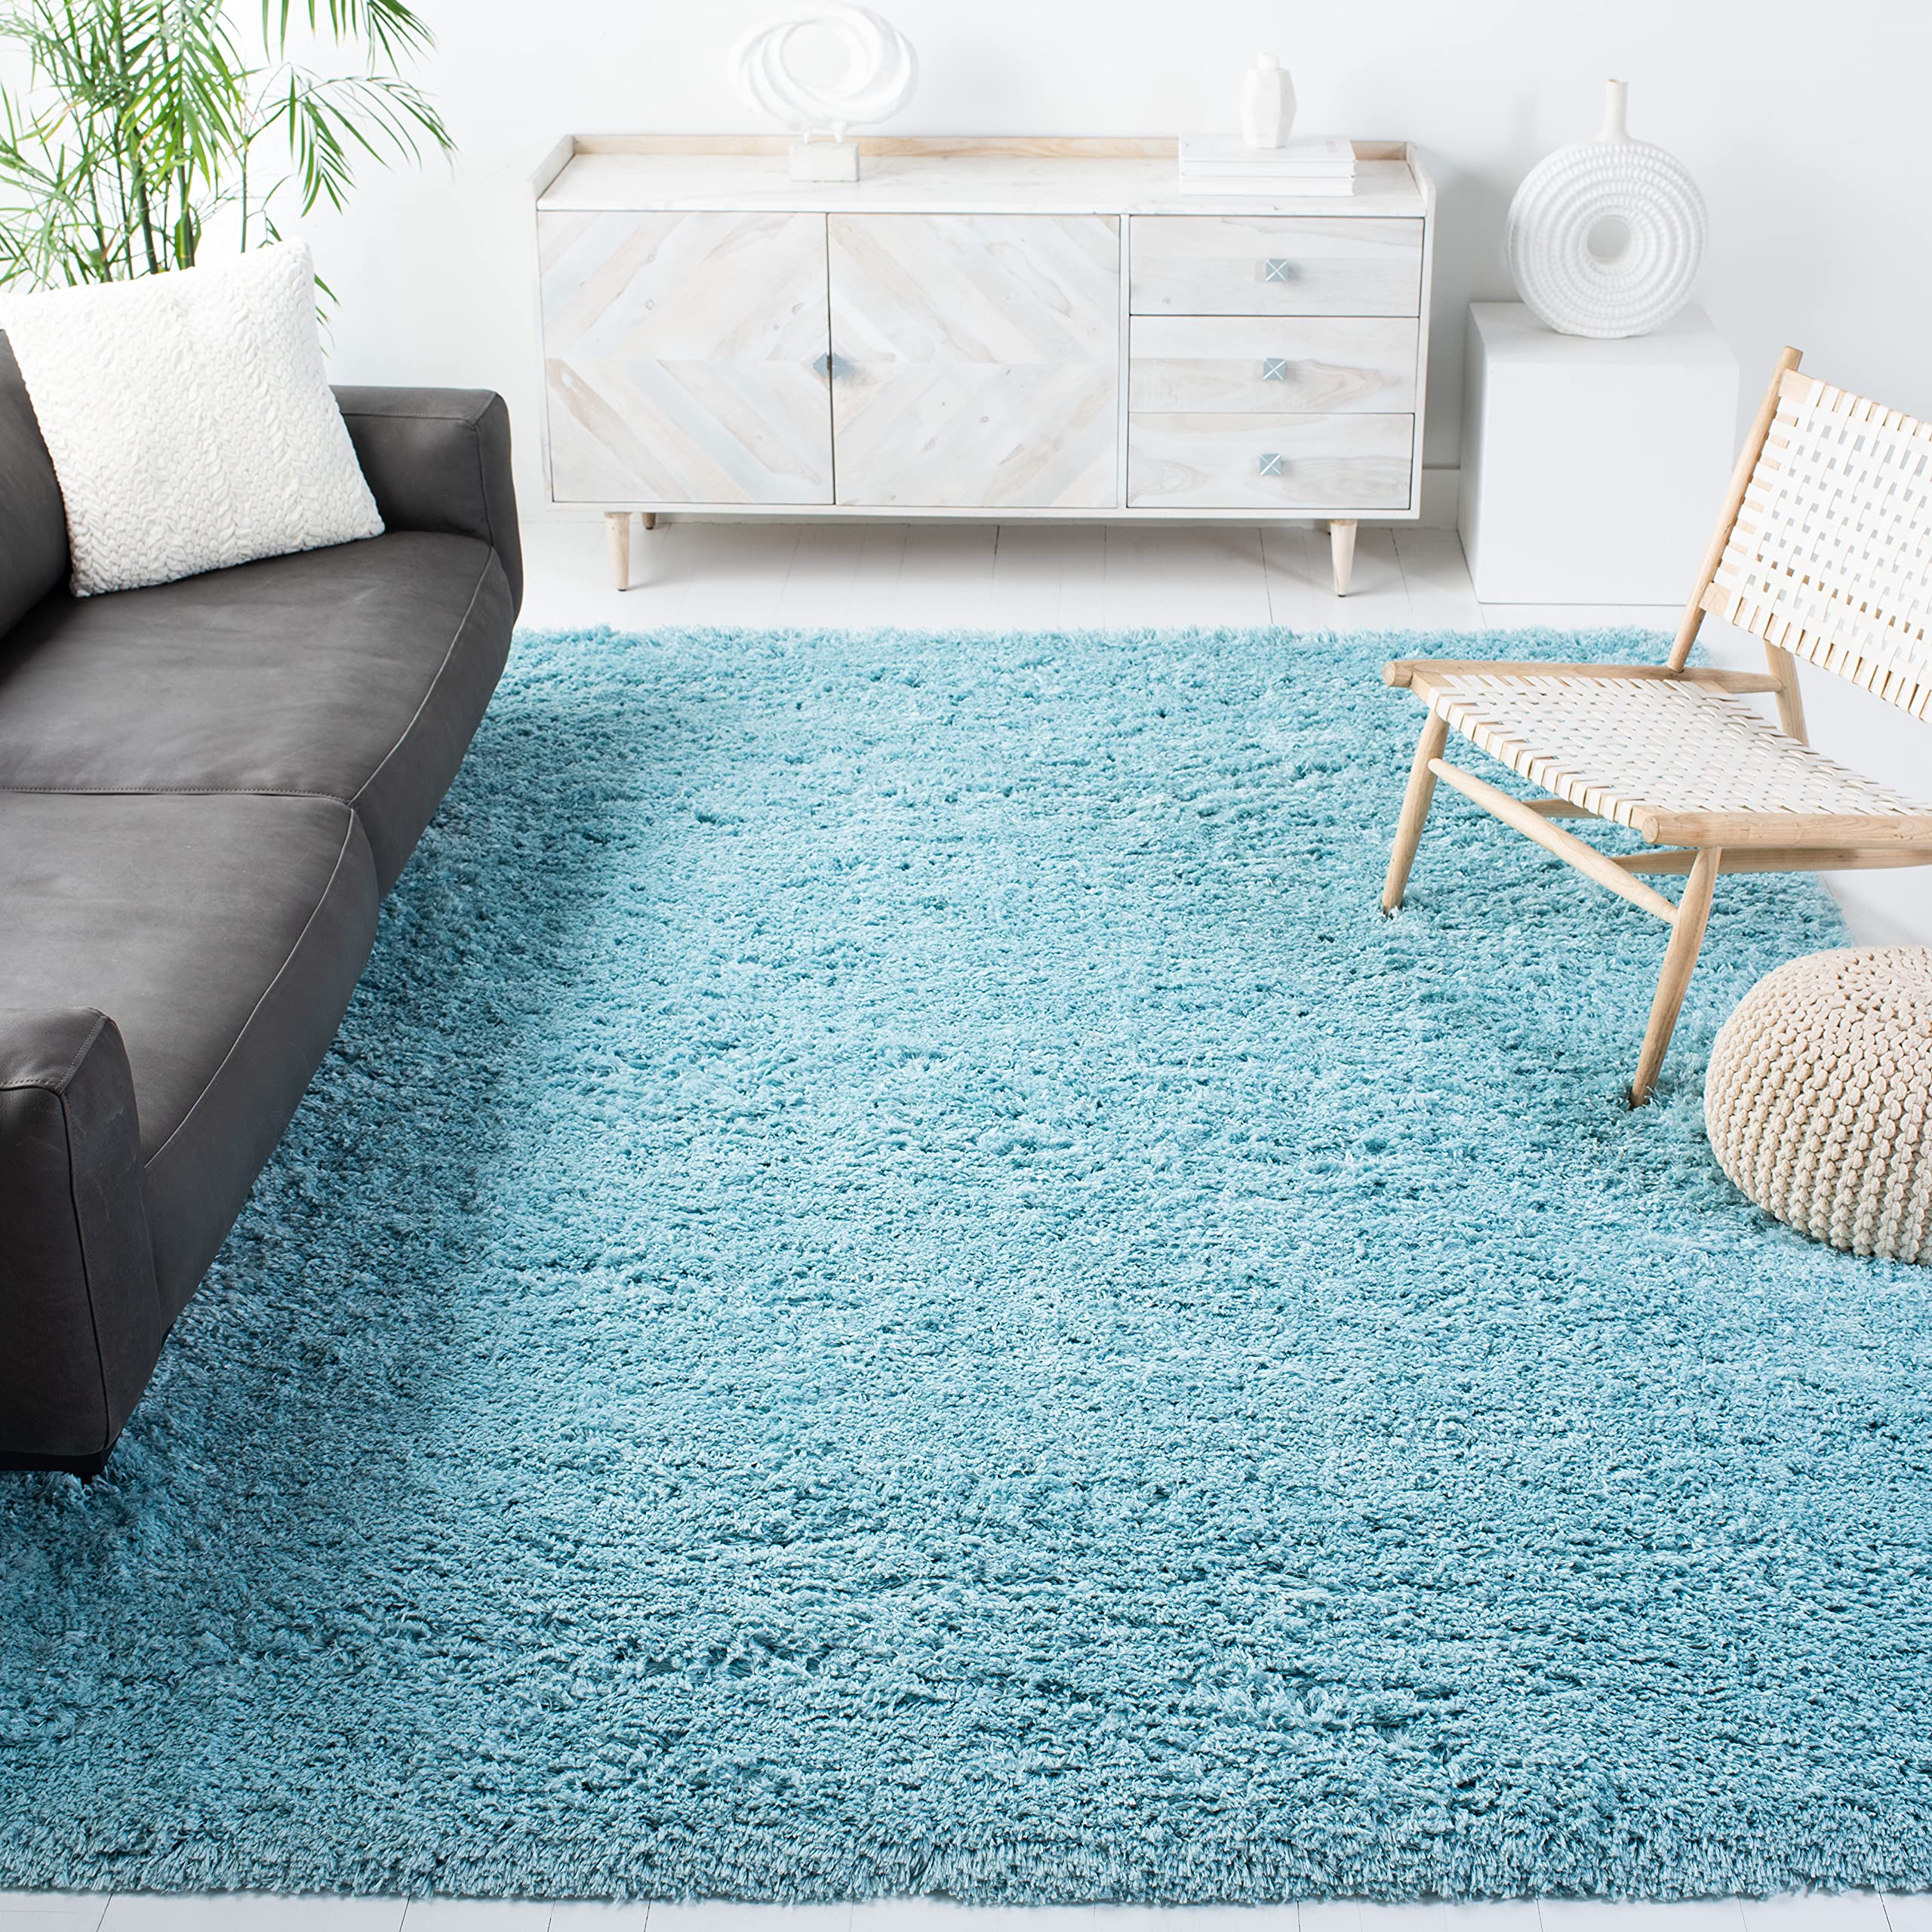 Safavieh Polar Shag Collection Area Rug - 10' x 14', Light Turquoise, Solid Glam Design, Non-Shedding & Easy Care, 3-inch ...